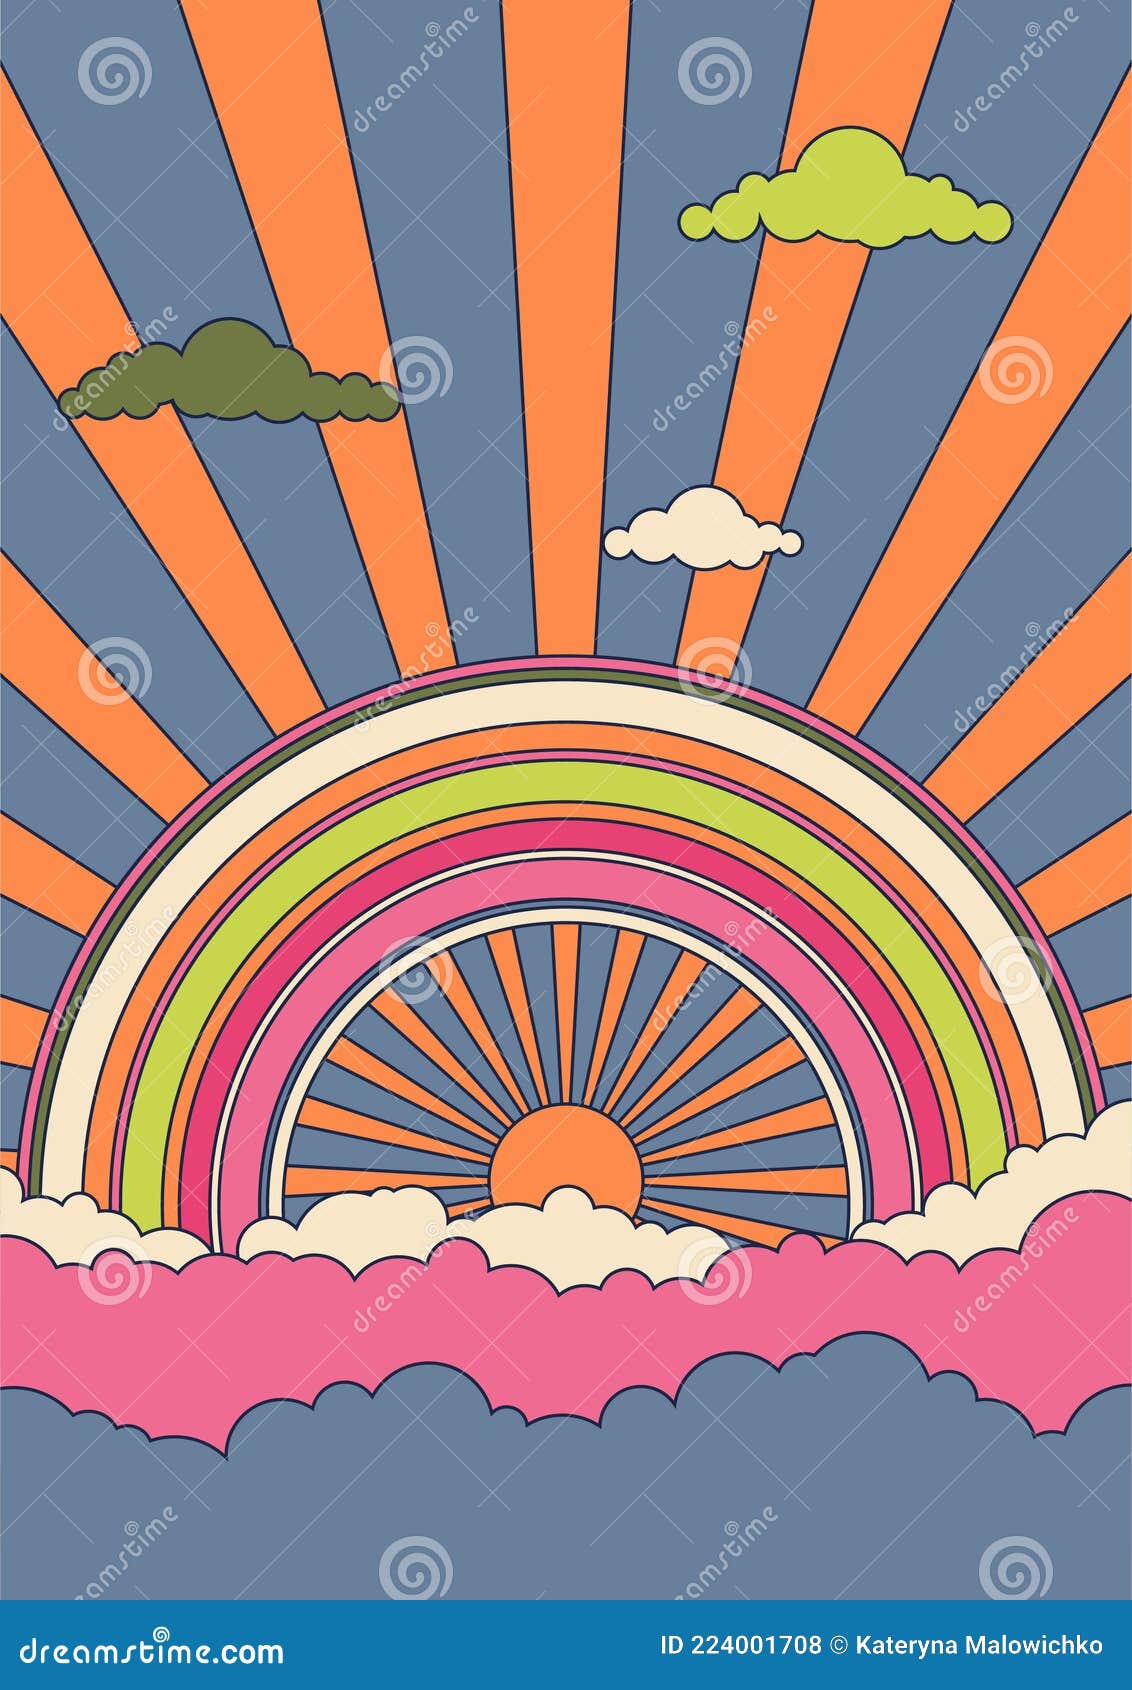 Psychedelic Sky Colorful Vector Illustration Stock Vector ...